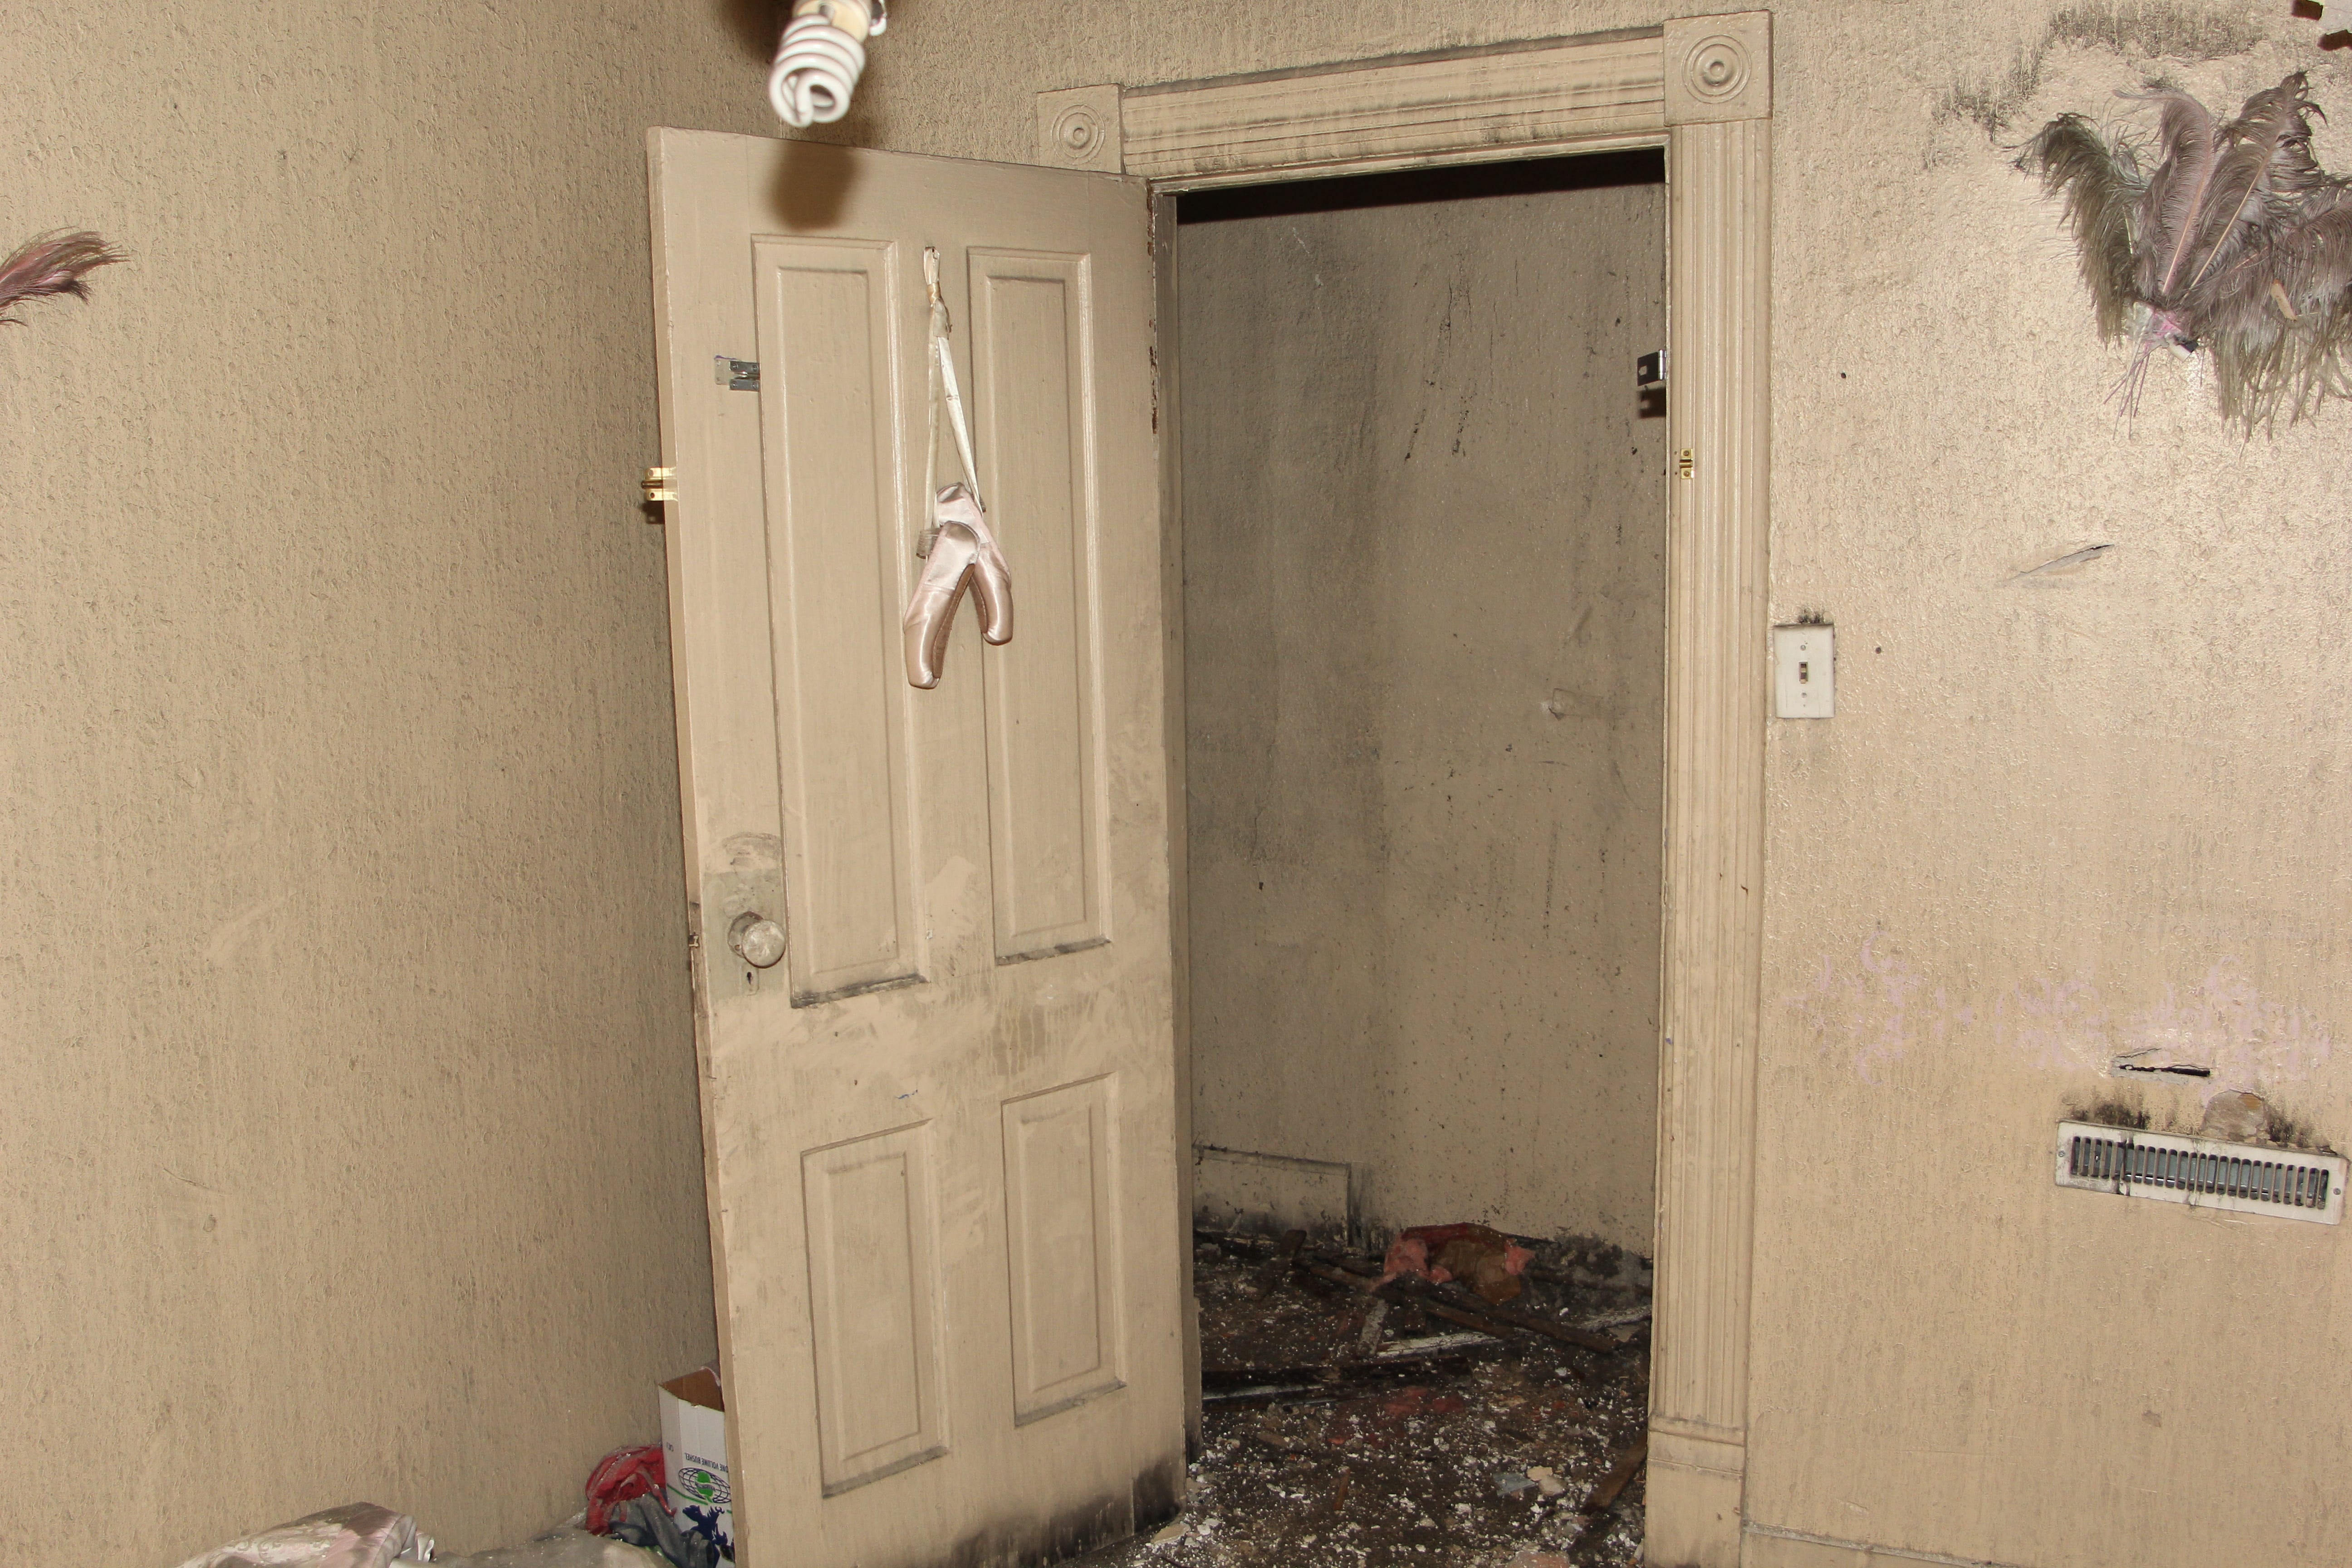 After the fire, ballet slippers hang from a door